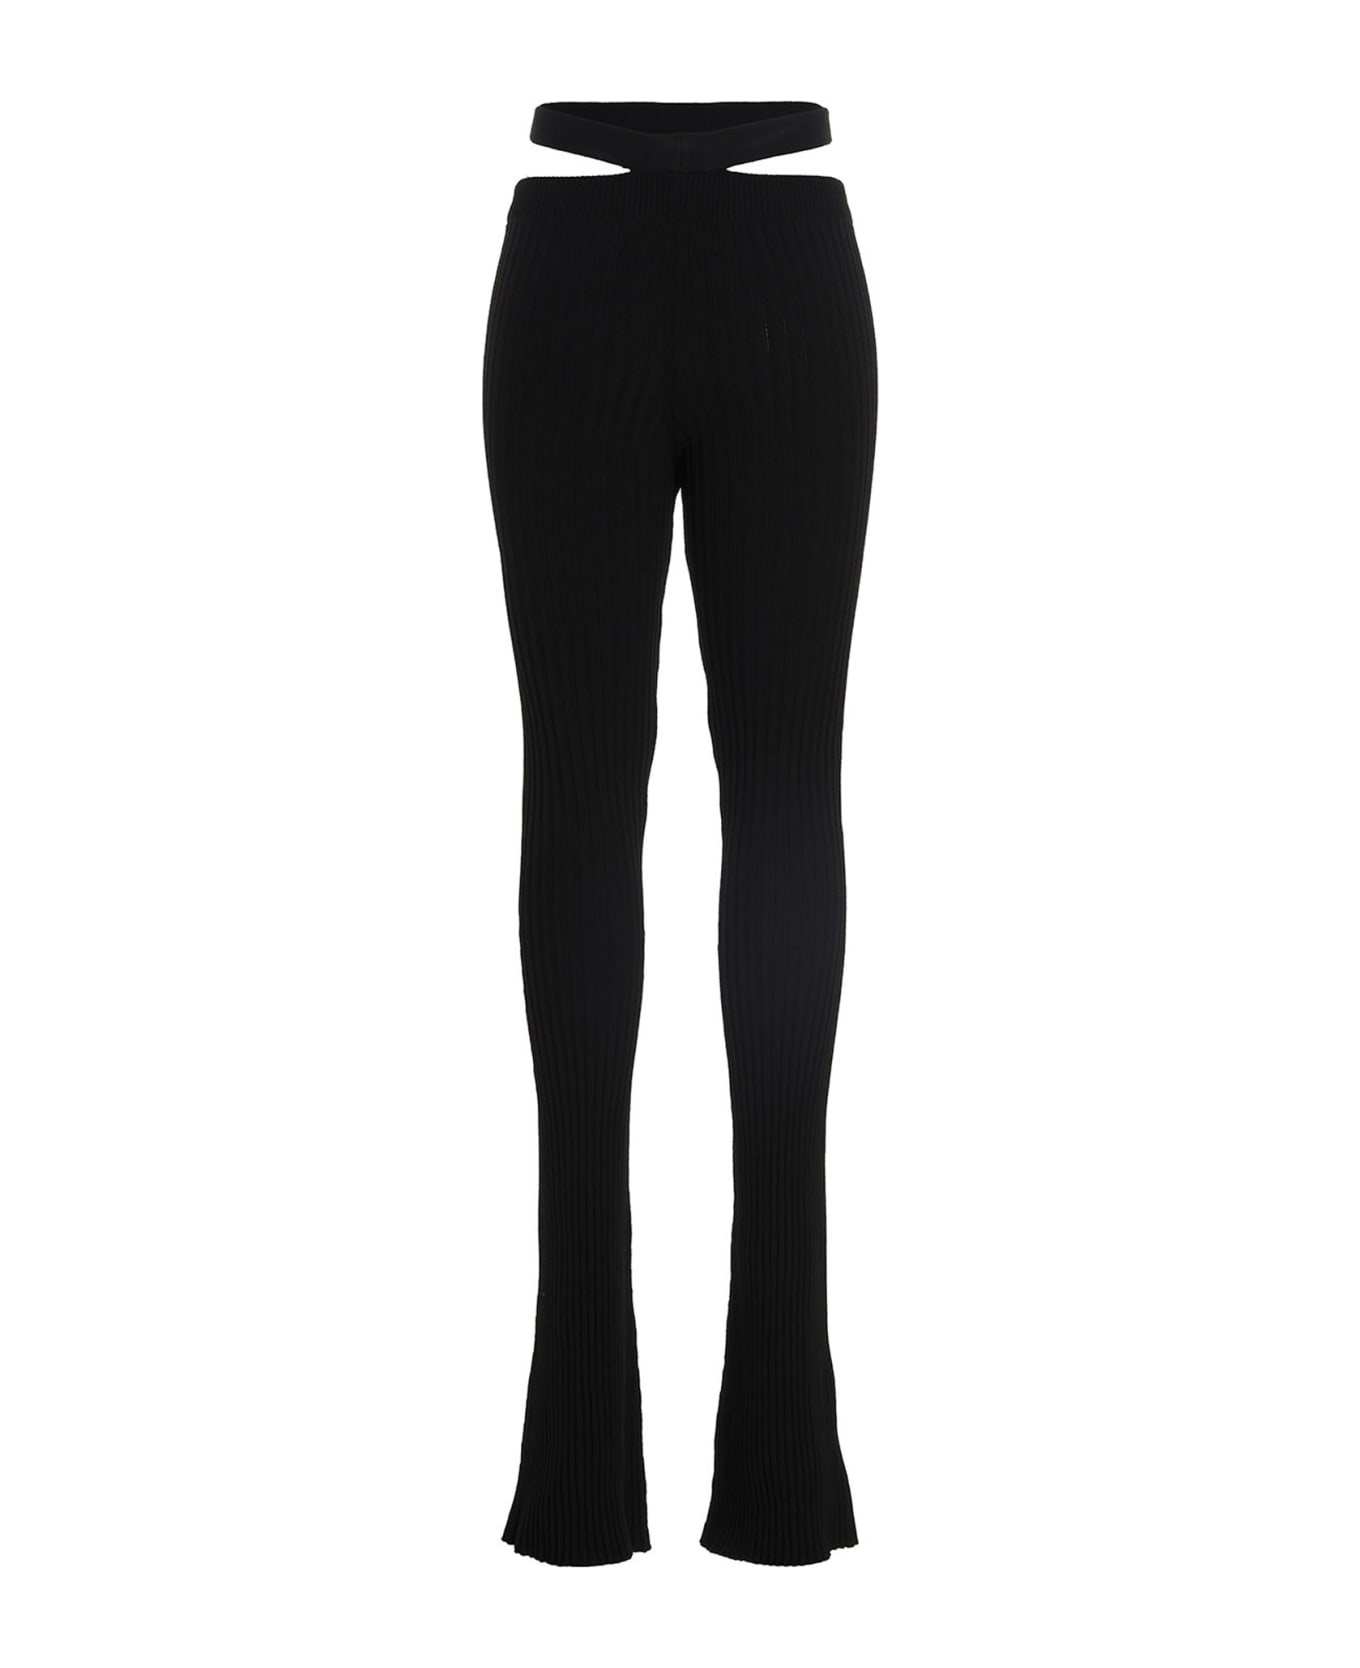 ANDREĀDAMO Ribbed Flared Trousers X-BIONIC - Black  